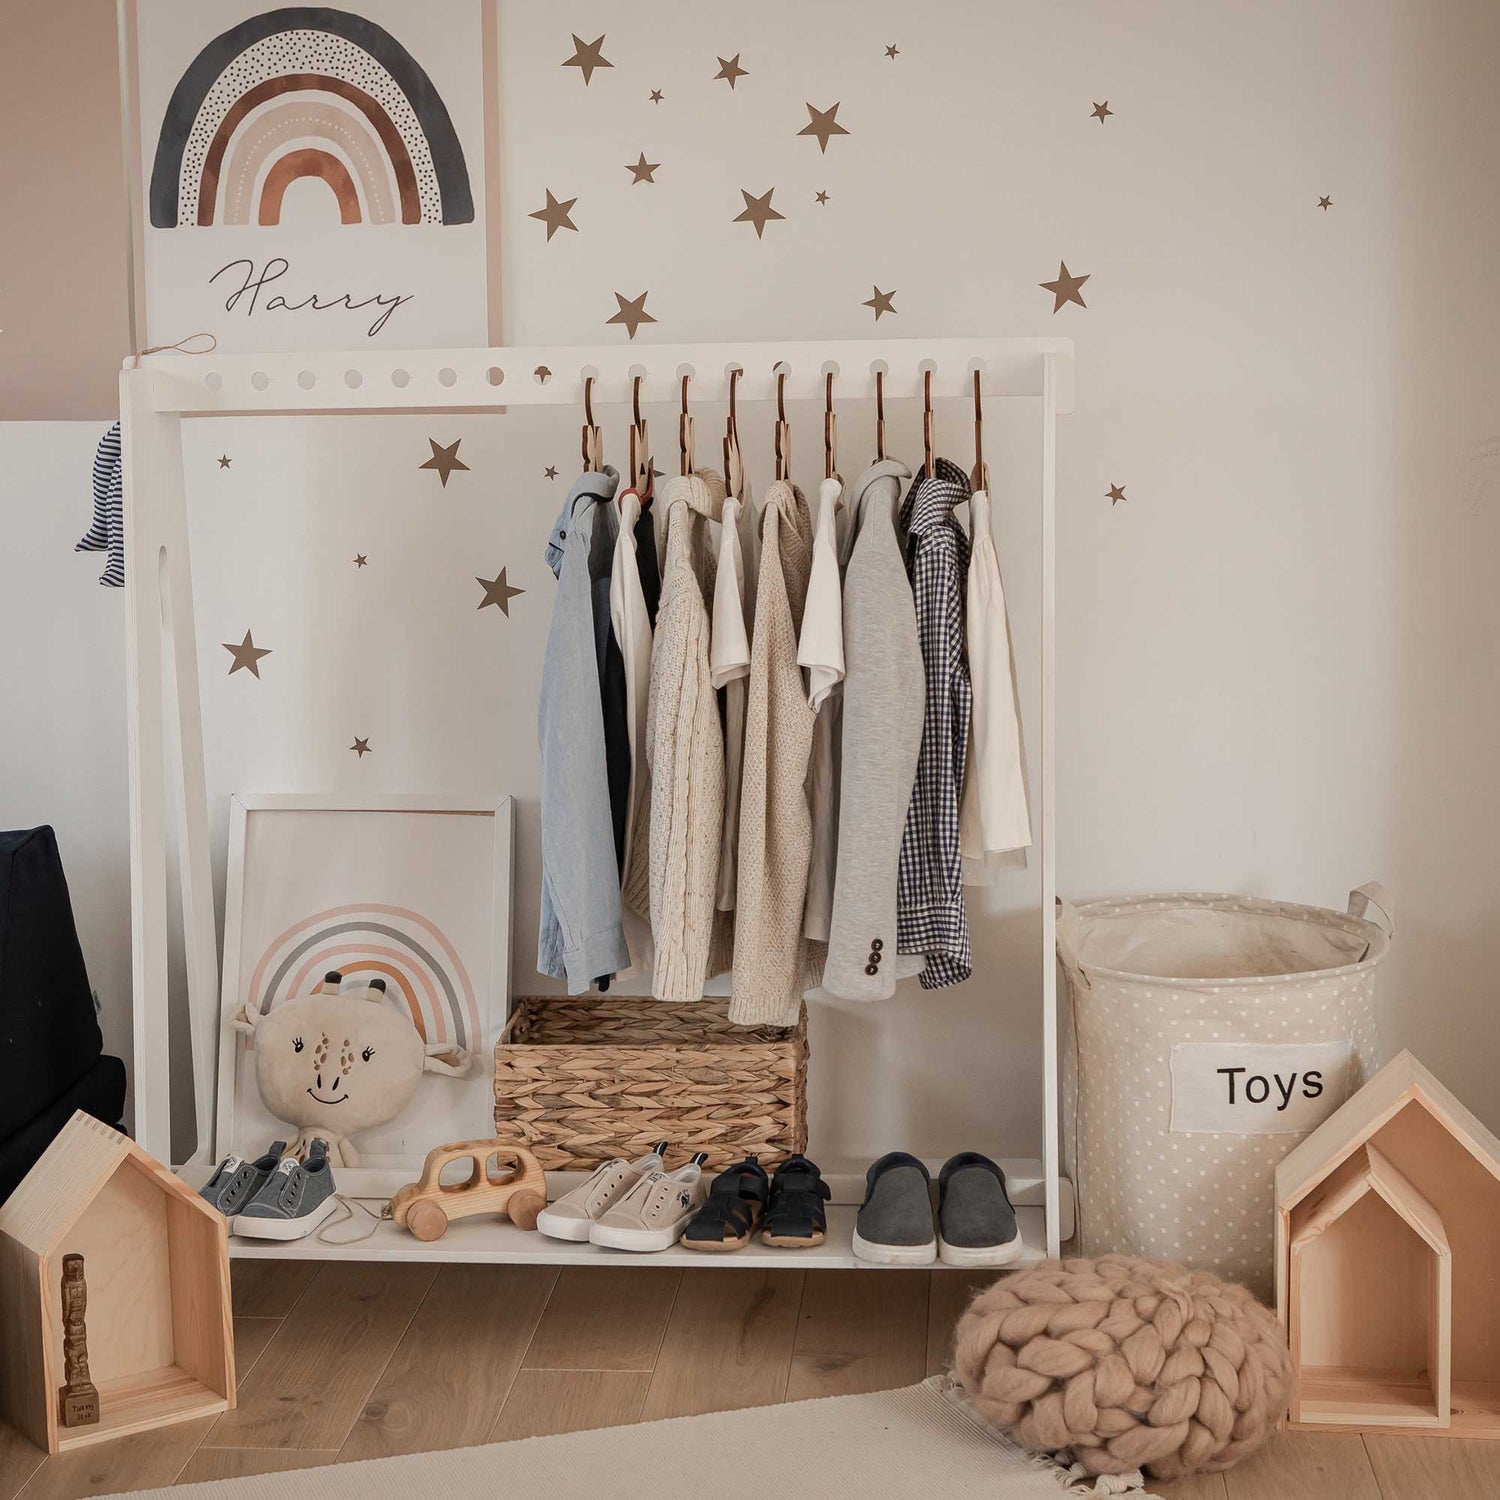 A child's room with clothes on a rack and stars on the wall.